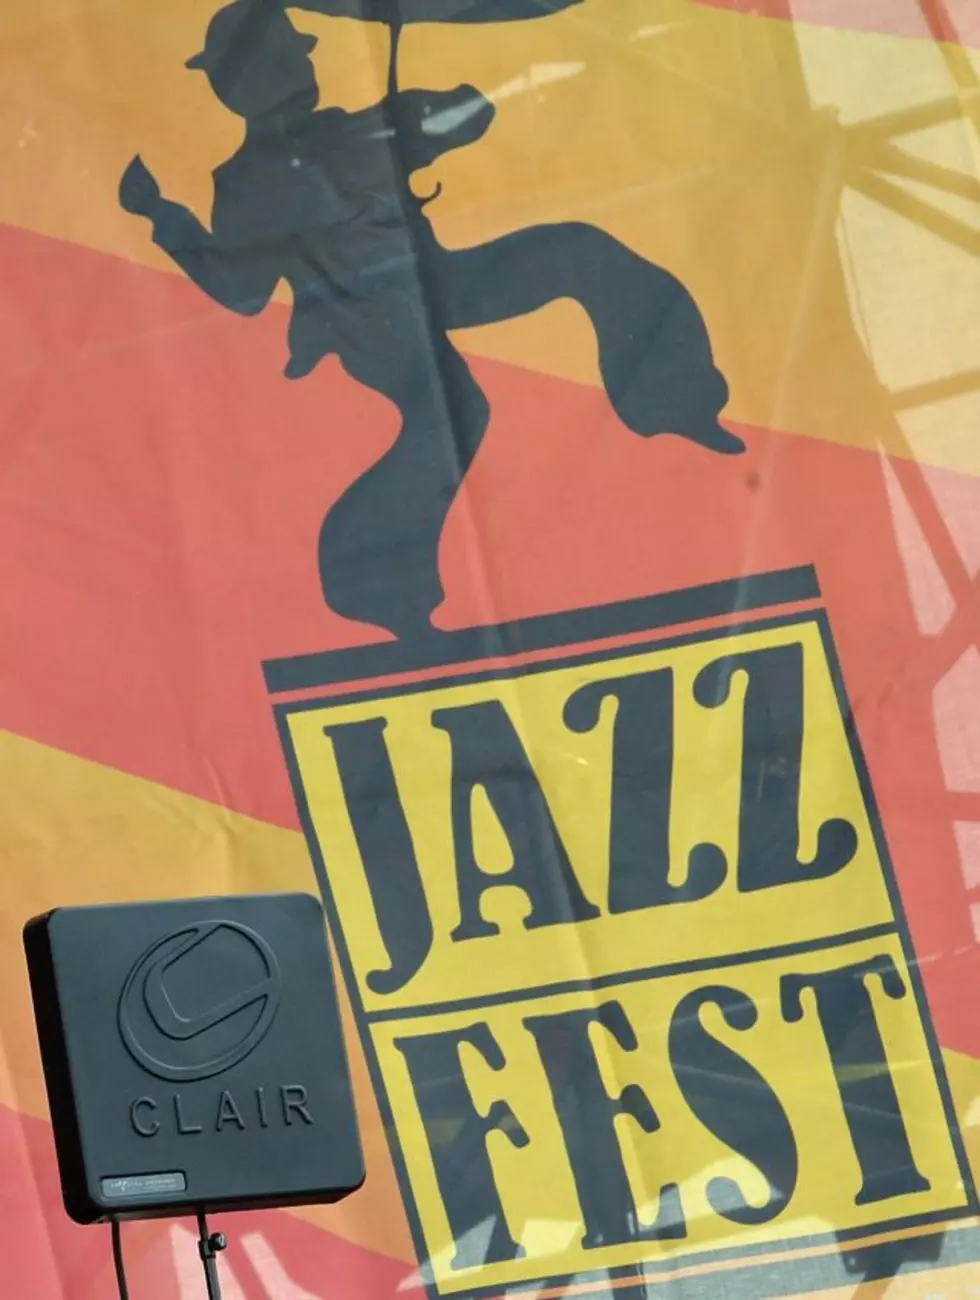 Want to Win Free Jazzfest Tickets?